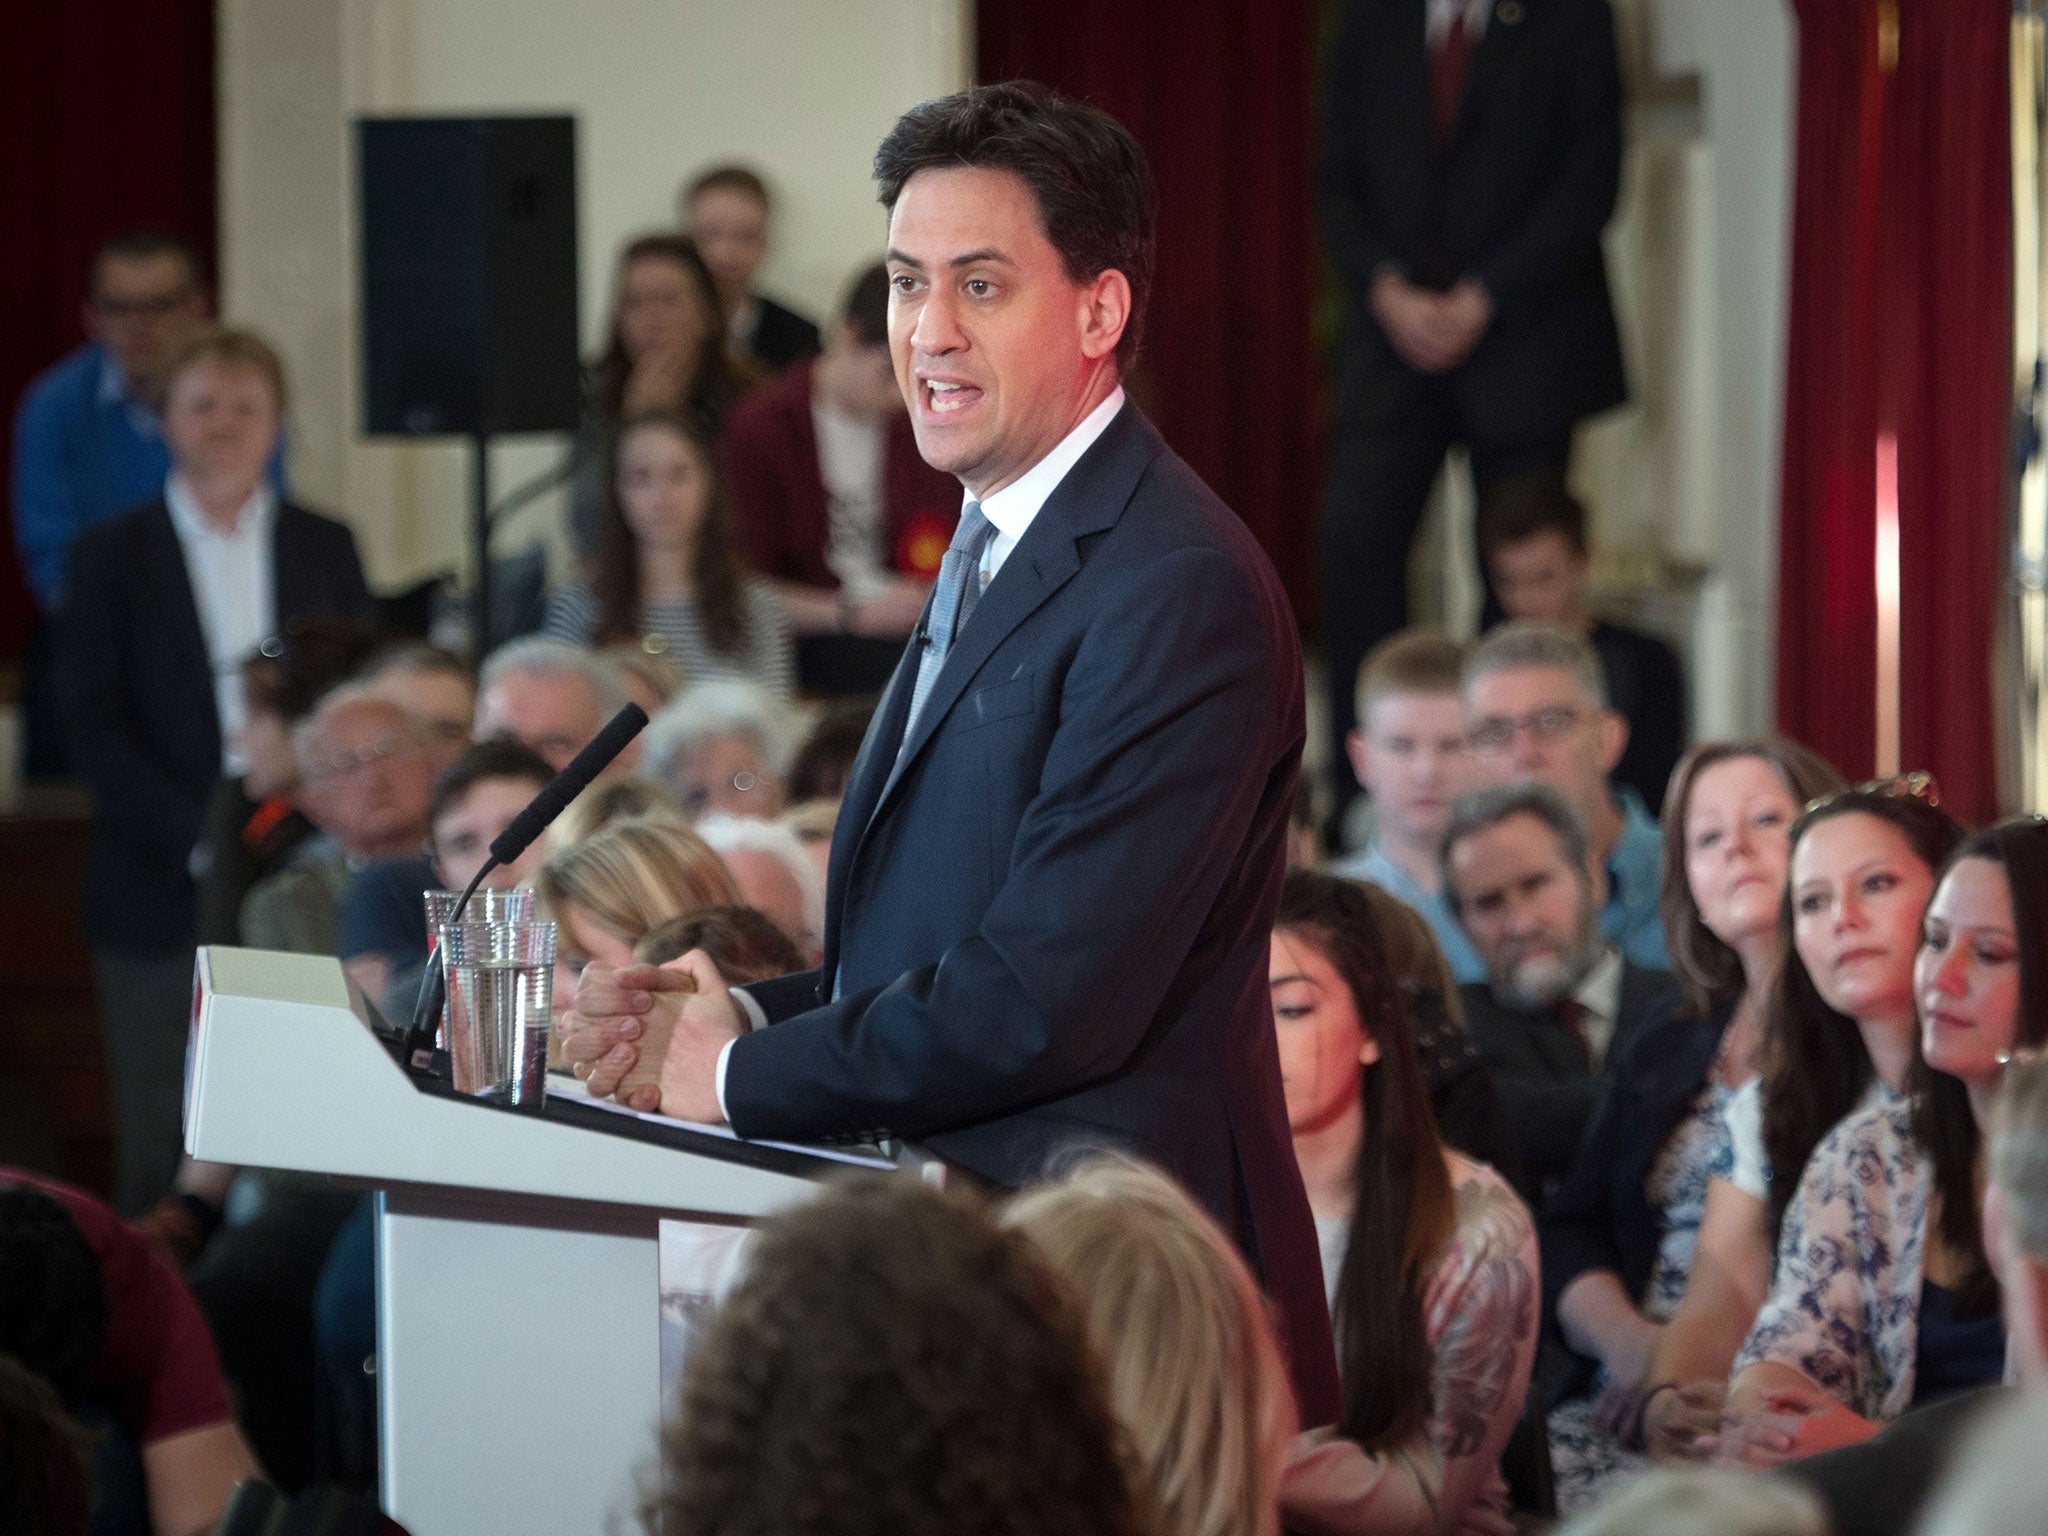 Speaking in the Wirral, Mr Miliband said his party would not make promises it could not keep